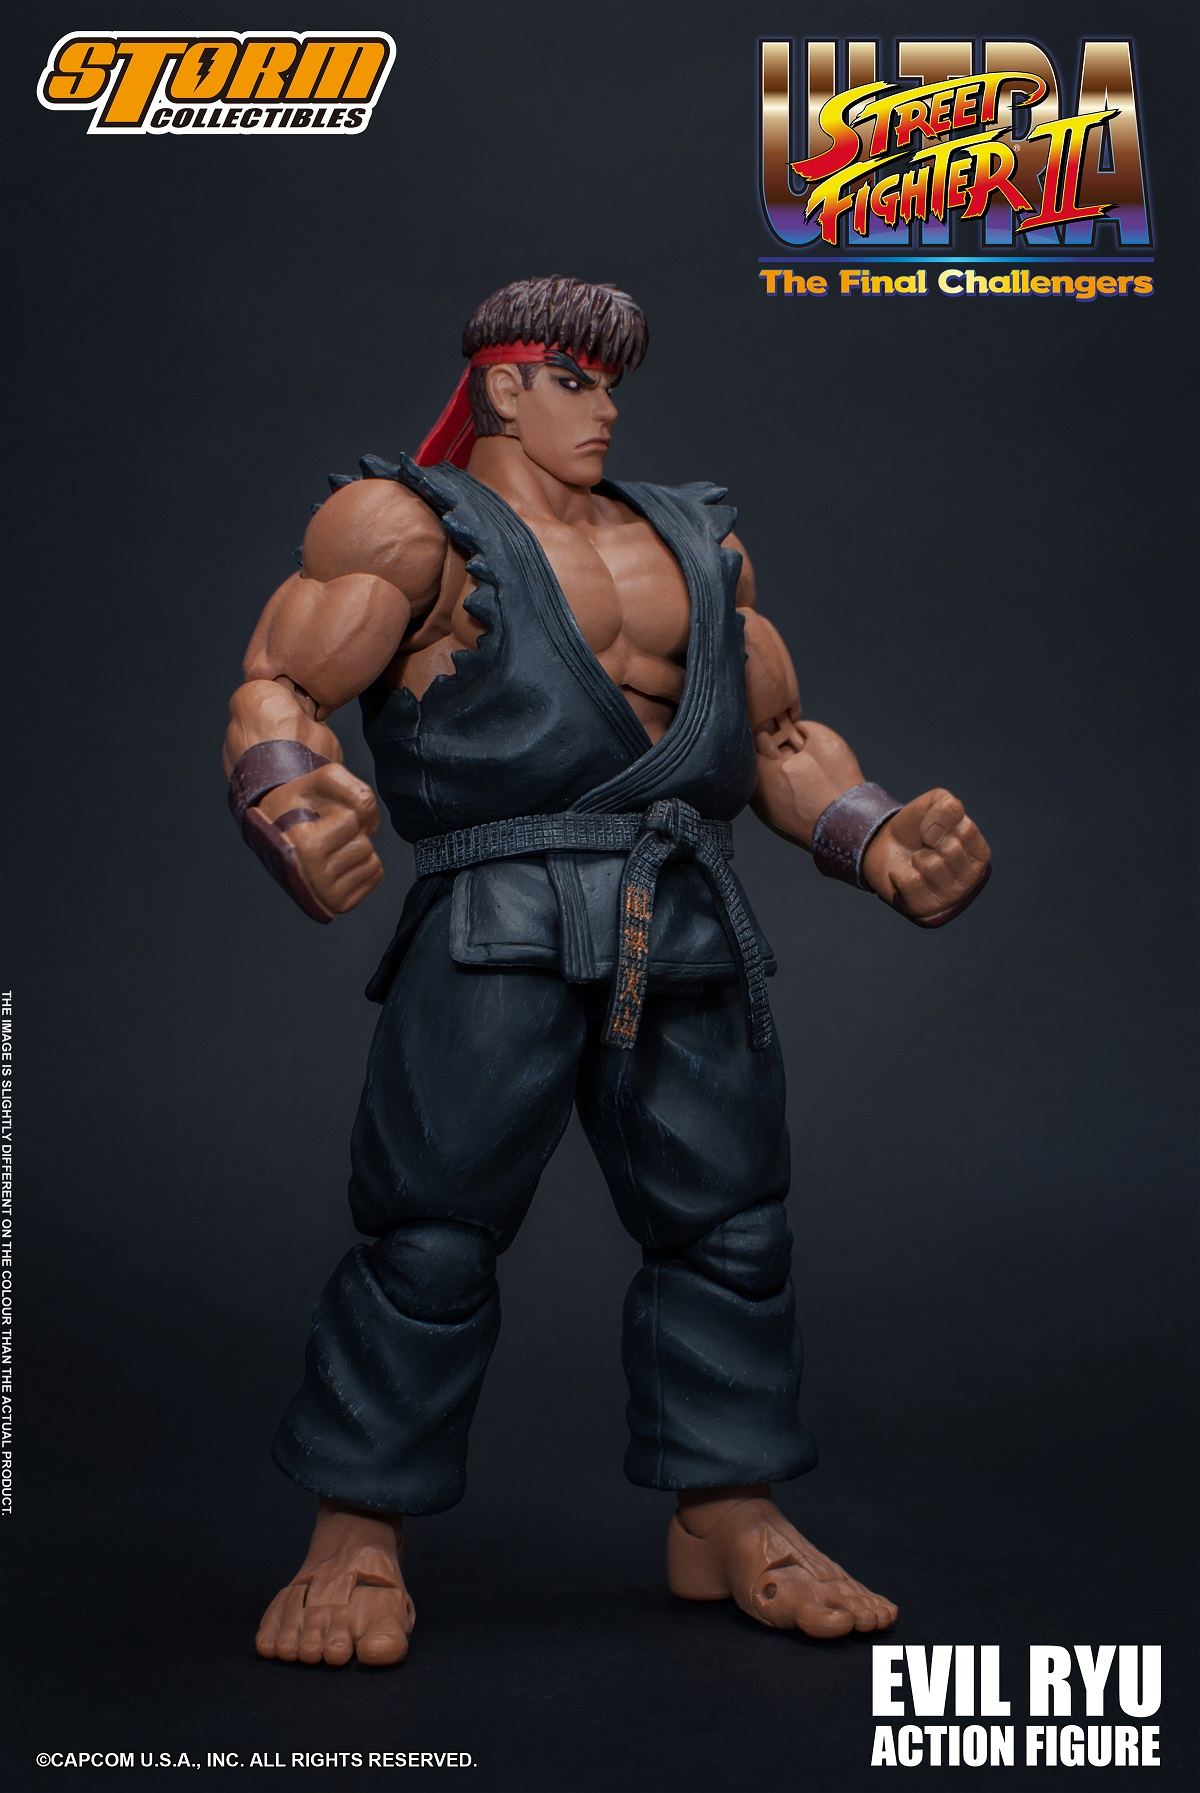 Nintendroid, Street Fighter II: The New Challengers for Super